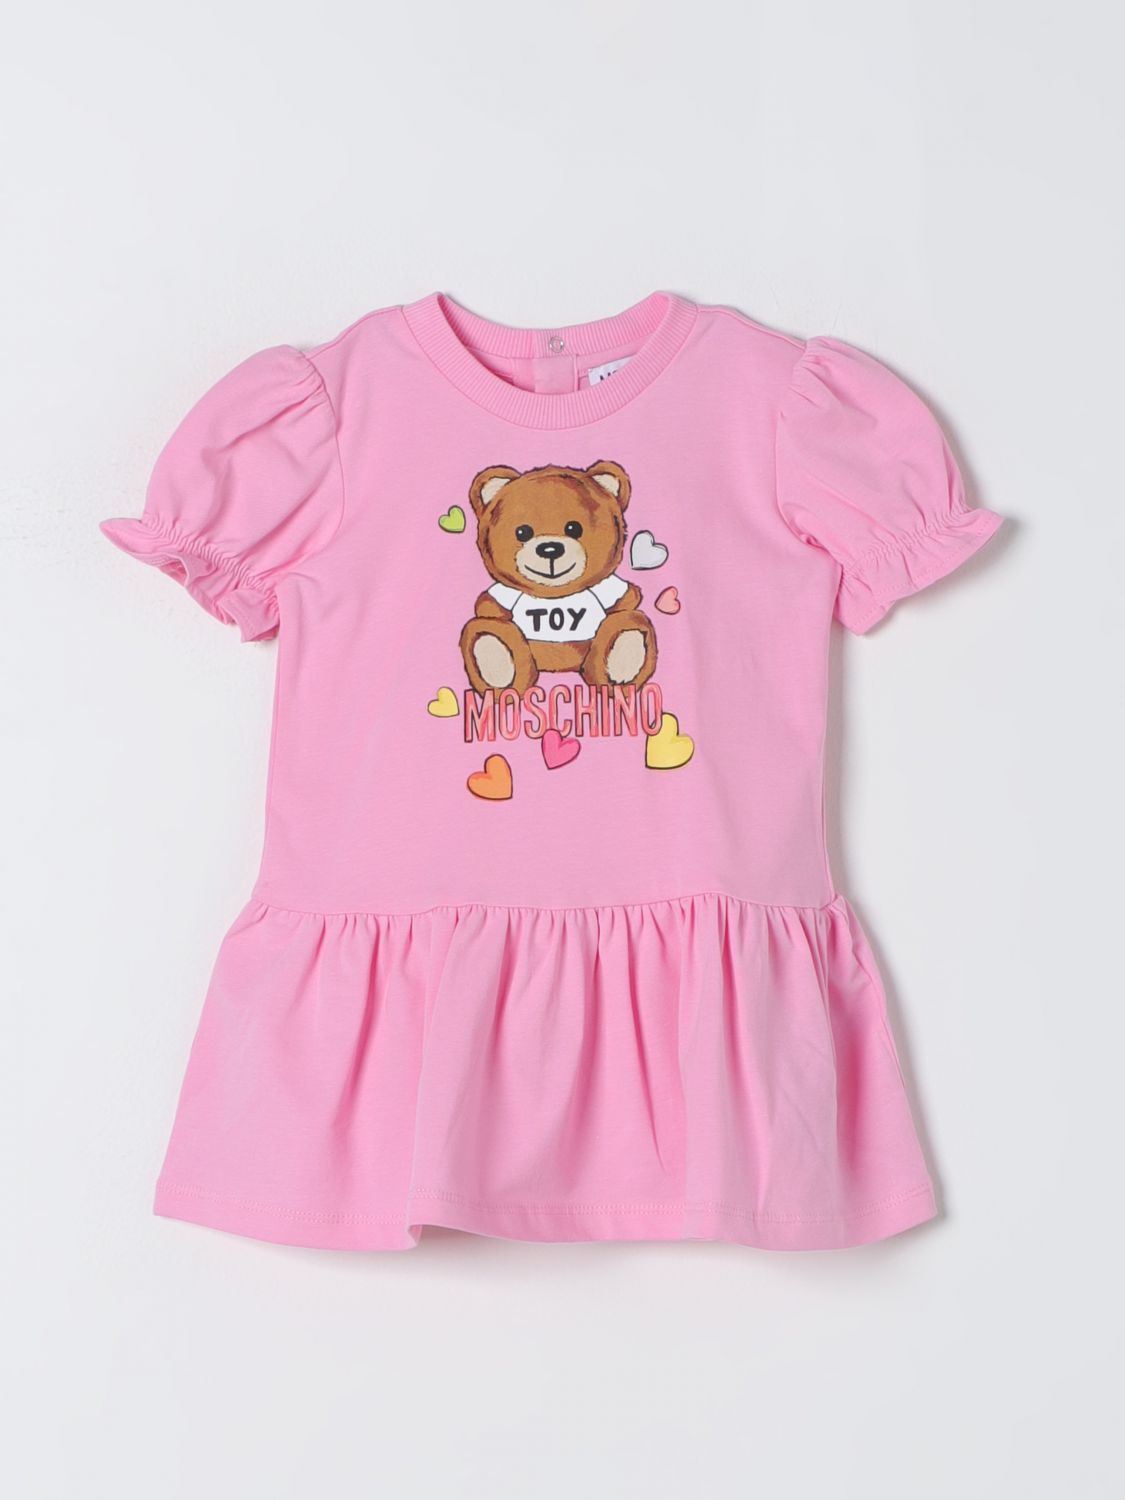 Moschino Baby Romper  Kids Color Pink